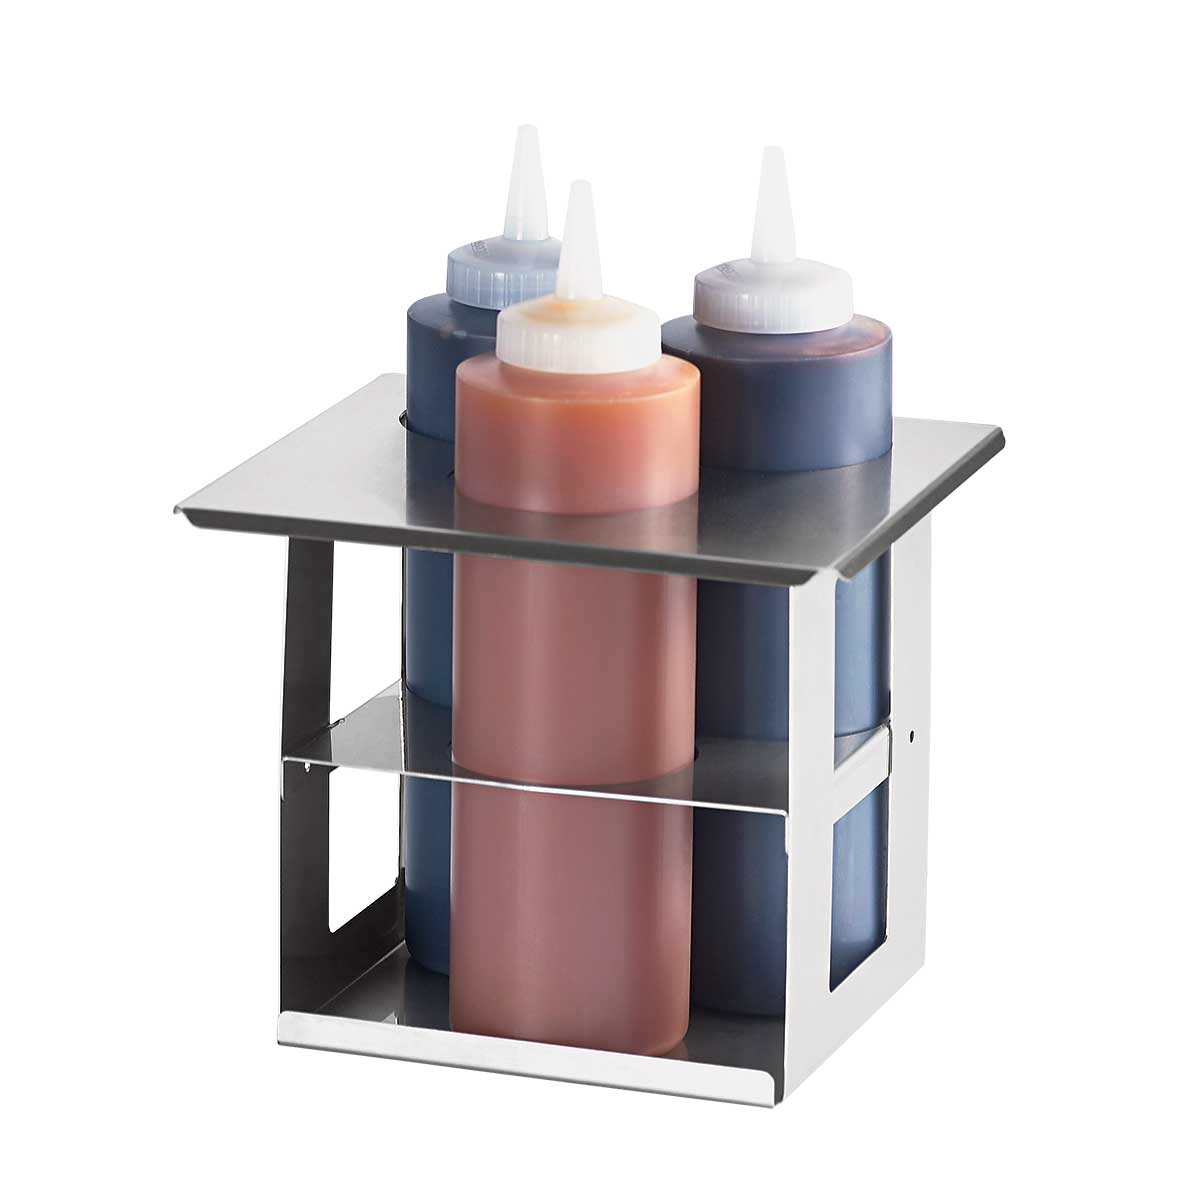 16 oz Bottles 8 Server Products SBH-8 Squeeze Bottle Holder Combo 1 Countertop, 1/3 Size Holder With Stainless Steel 